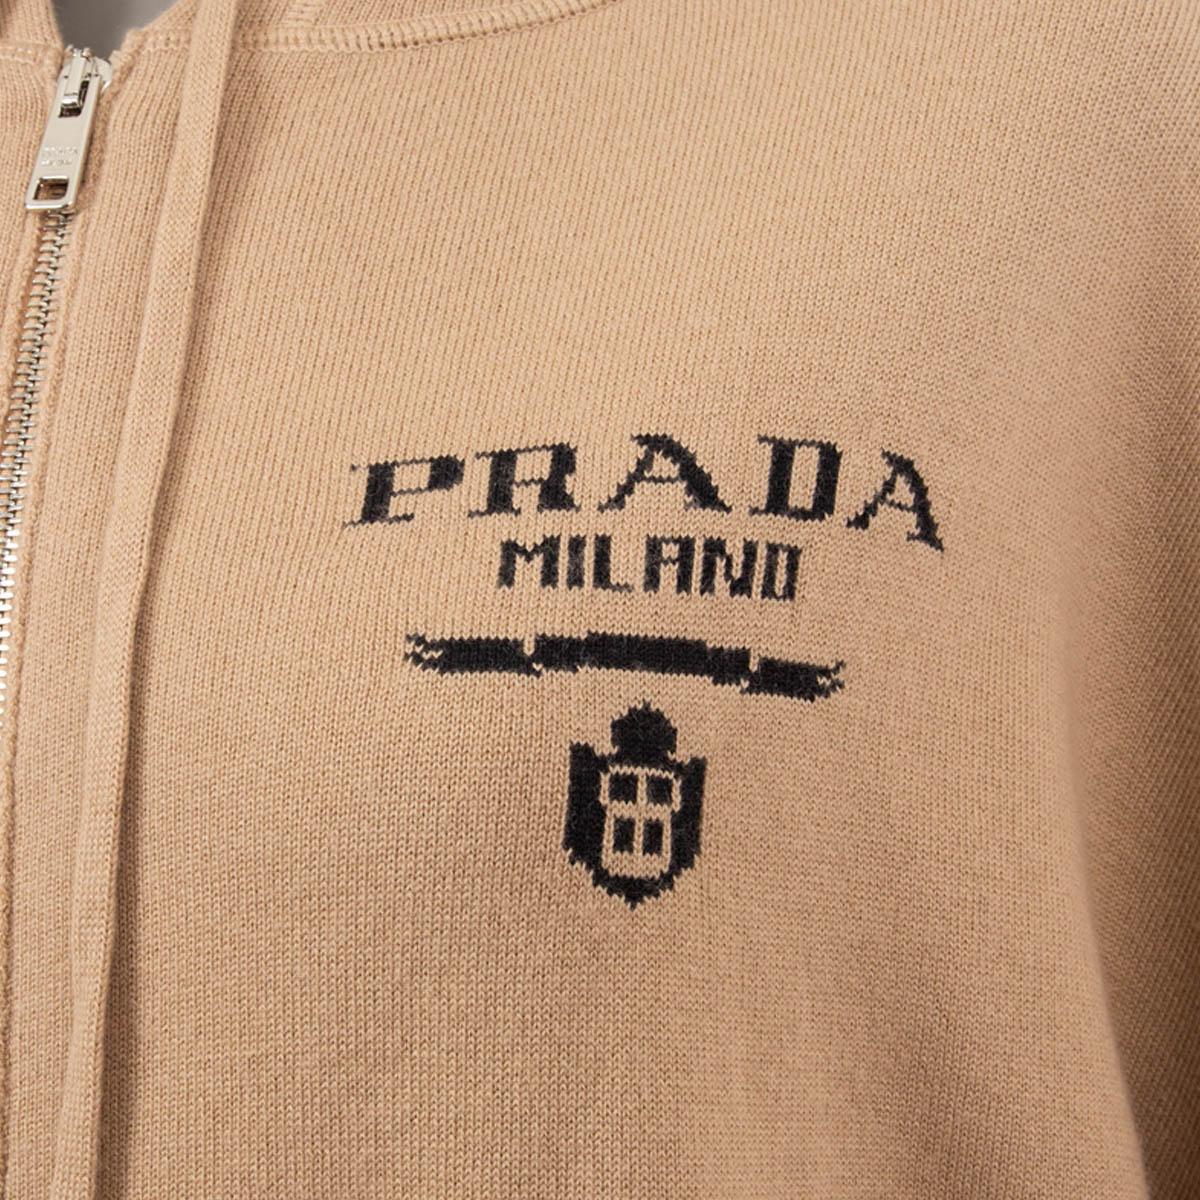 PRADA beige cashmere INTARSIA LOGO ZIP FRONT HOODED Cardigan Sweater 38 XS In Excellent Condition For Sale In Zürich, CH